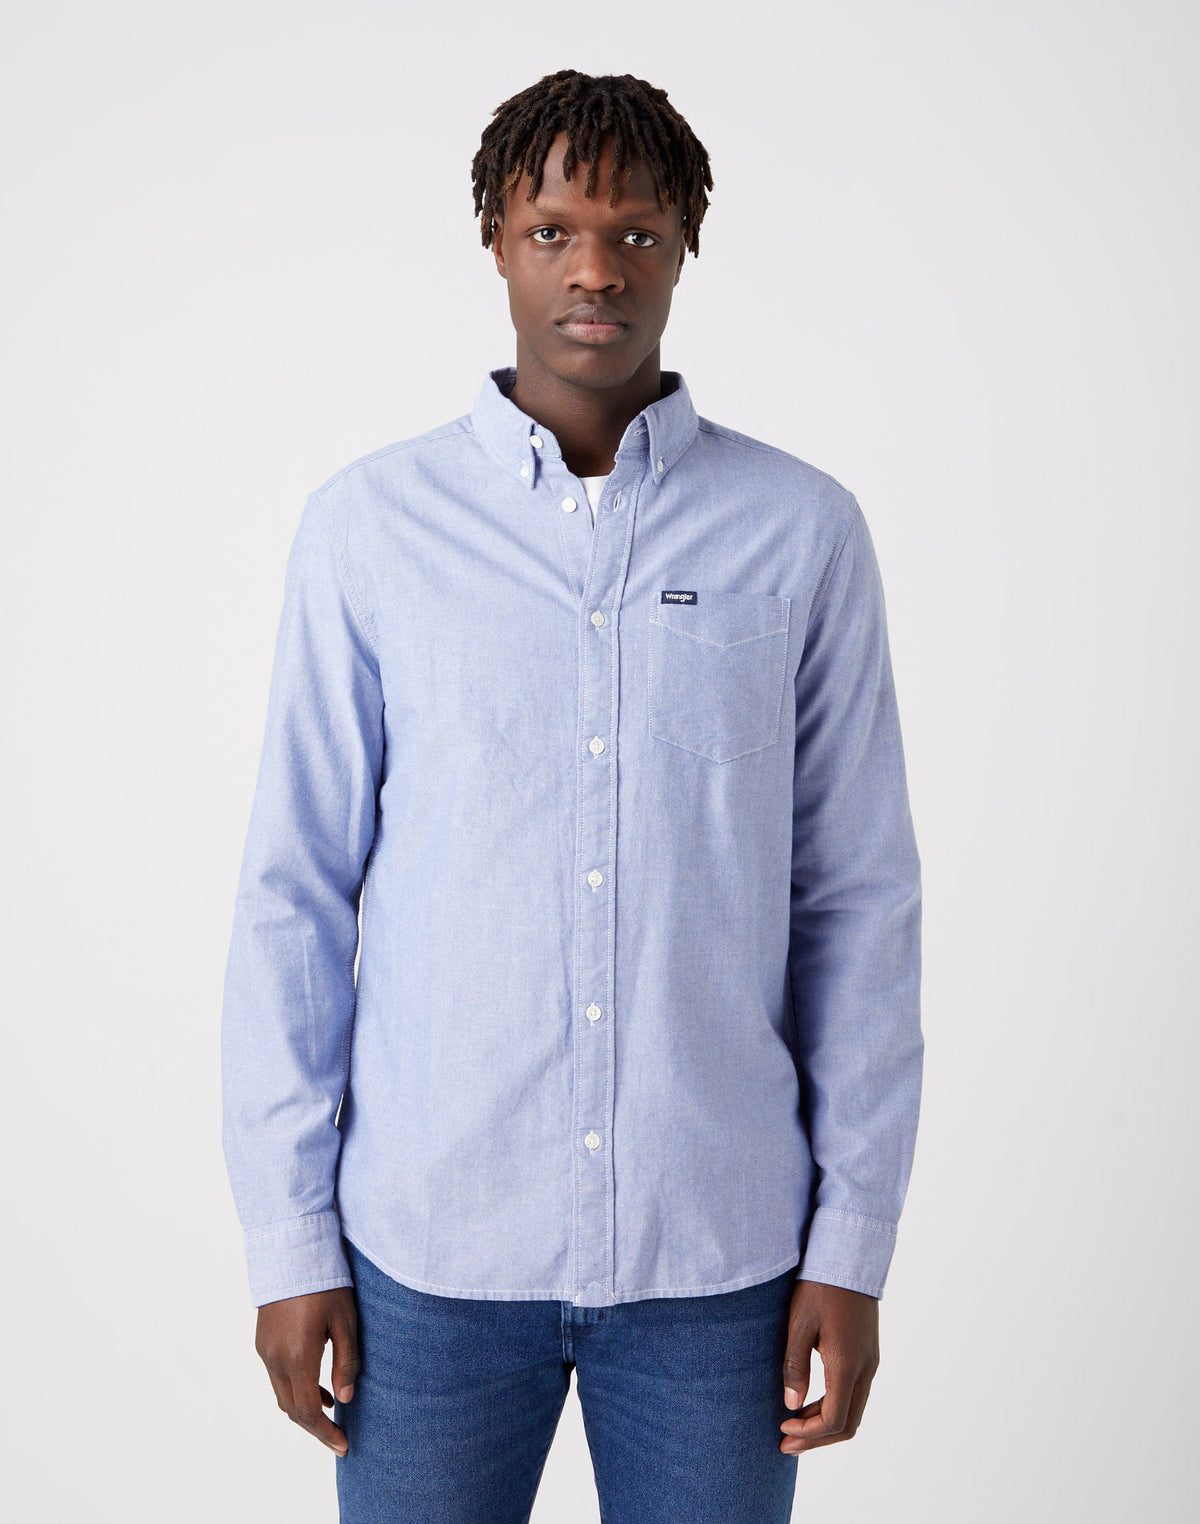 One Pocket Button Down Shirt in Blue Tint